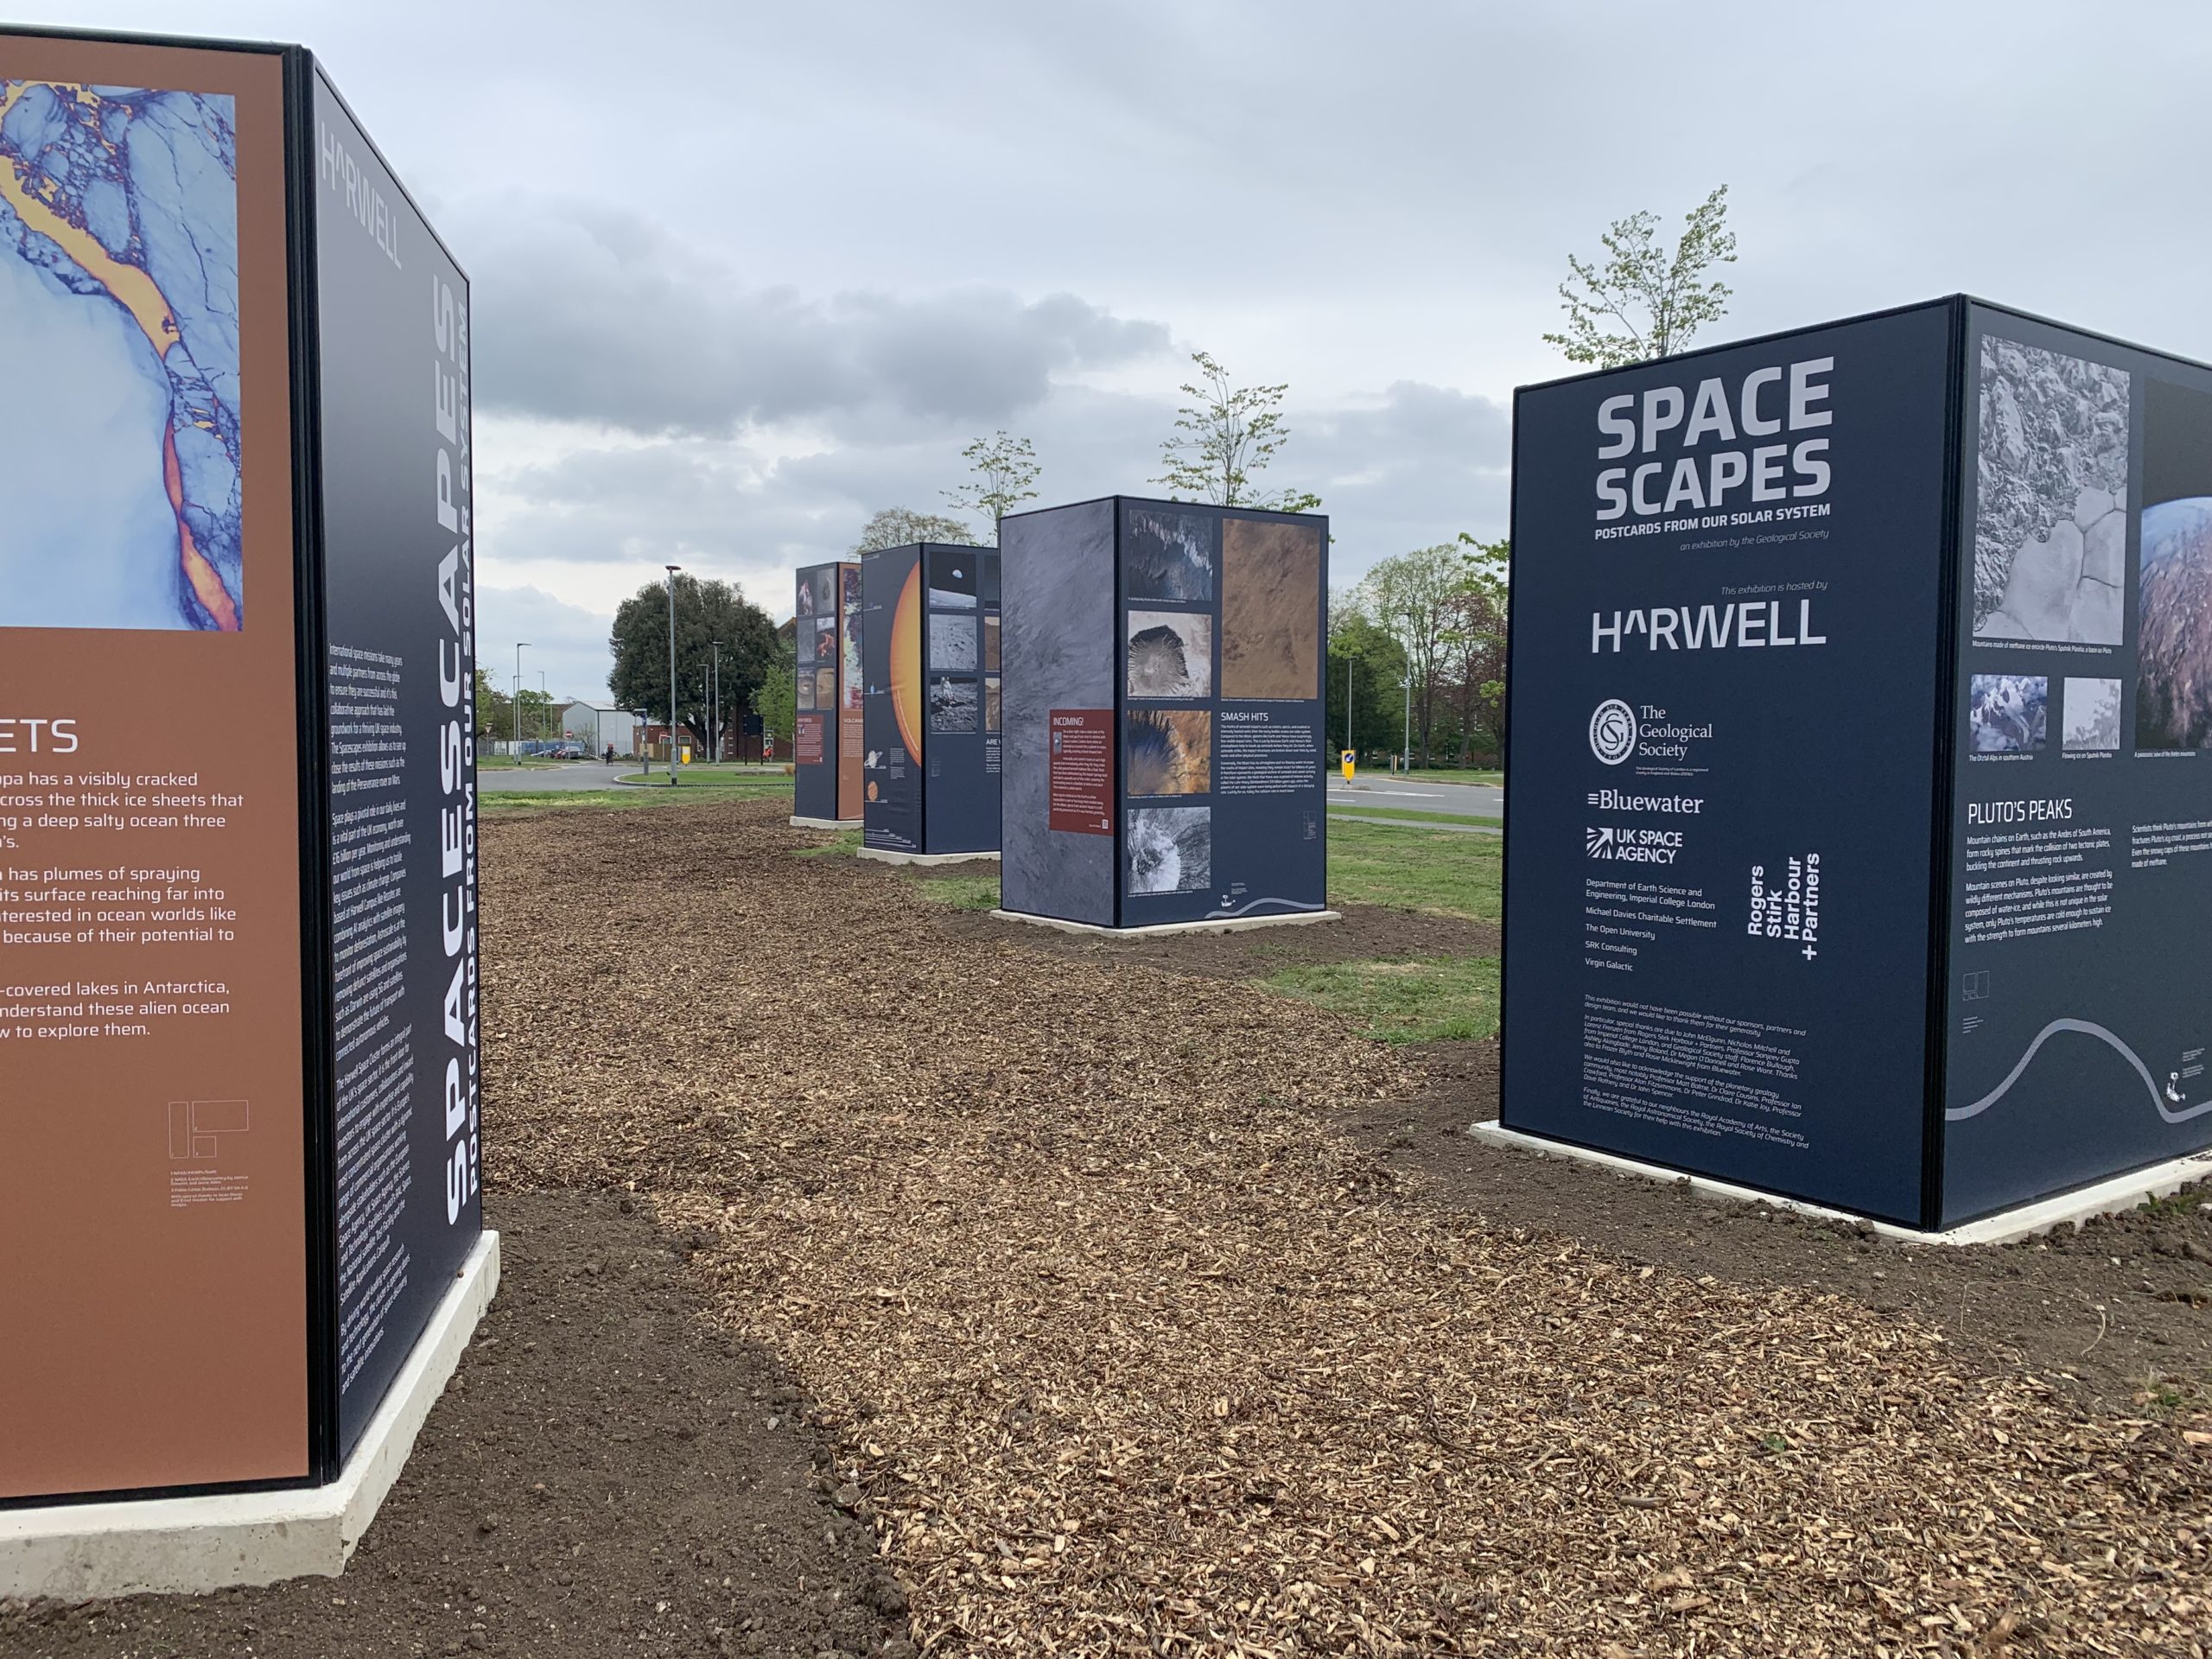 Venture into outer space at Harwell – Spacescapes